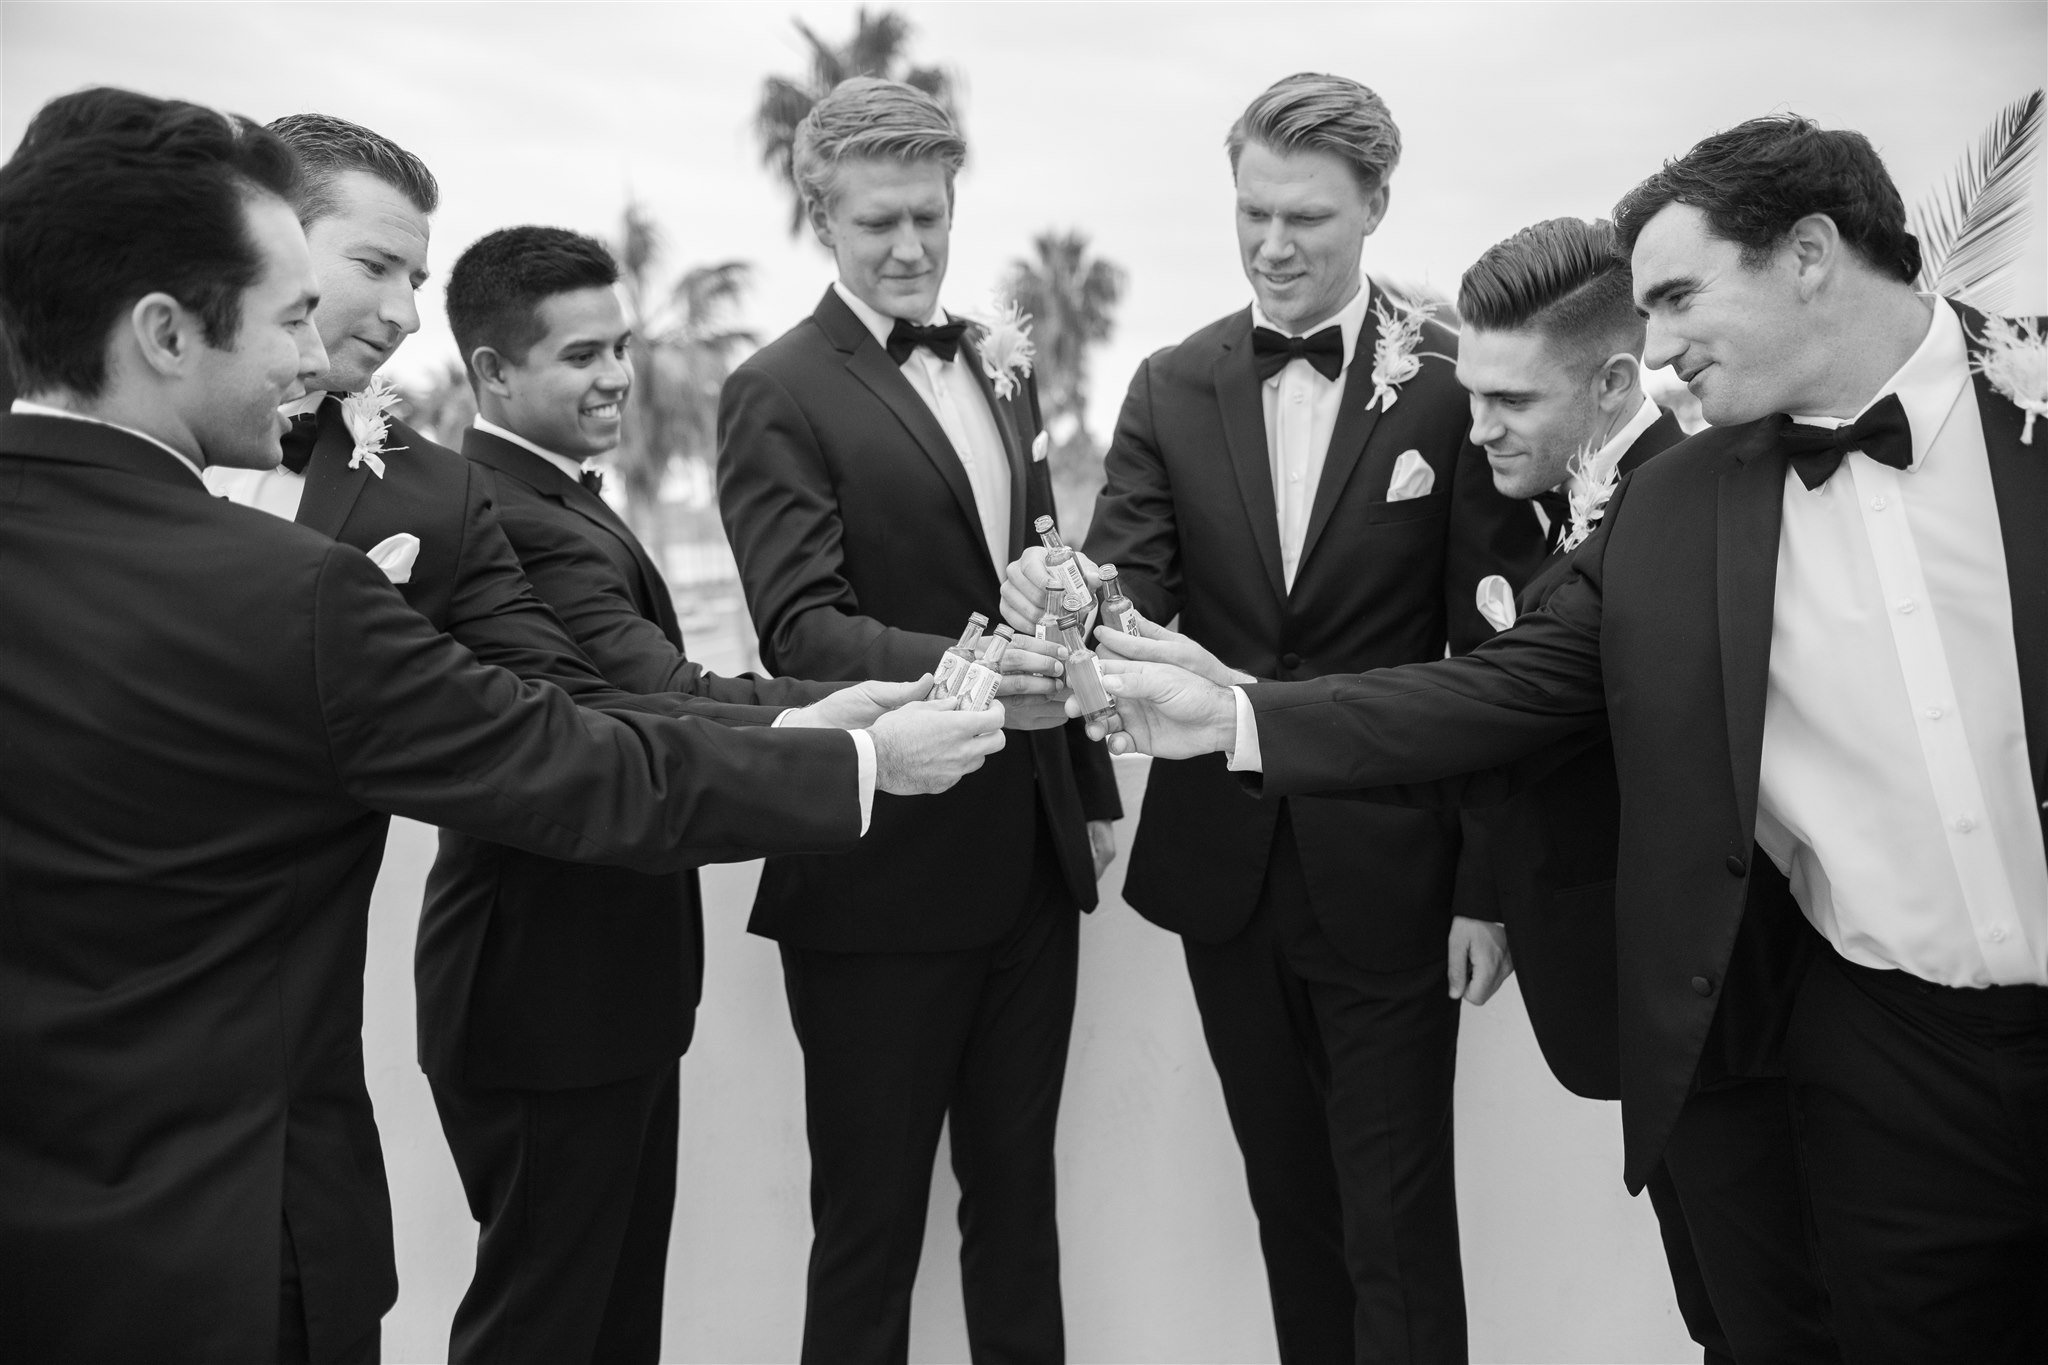 www.santabarbarawedding.com | Events by Fran | Wonder Tribe | Santa Barbara Courthouse | Groom and Groomsmen Taking a Shot Before Ceremony